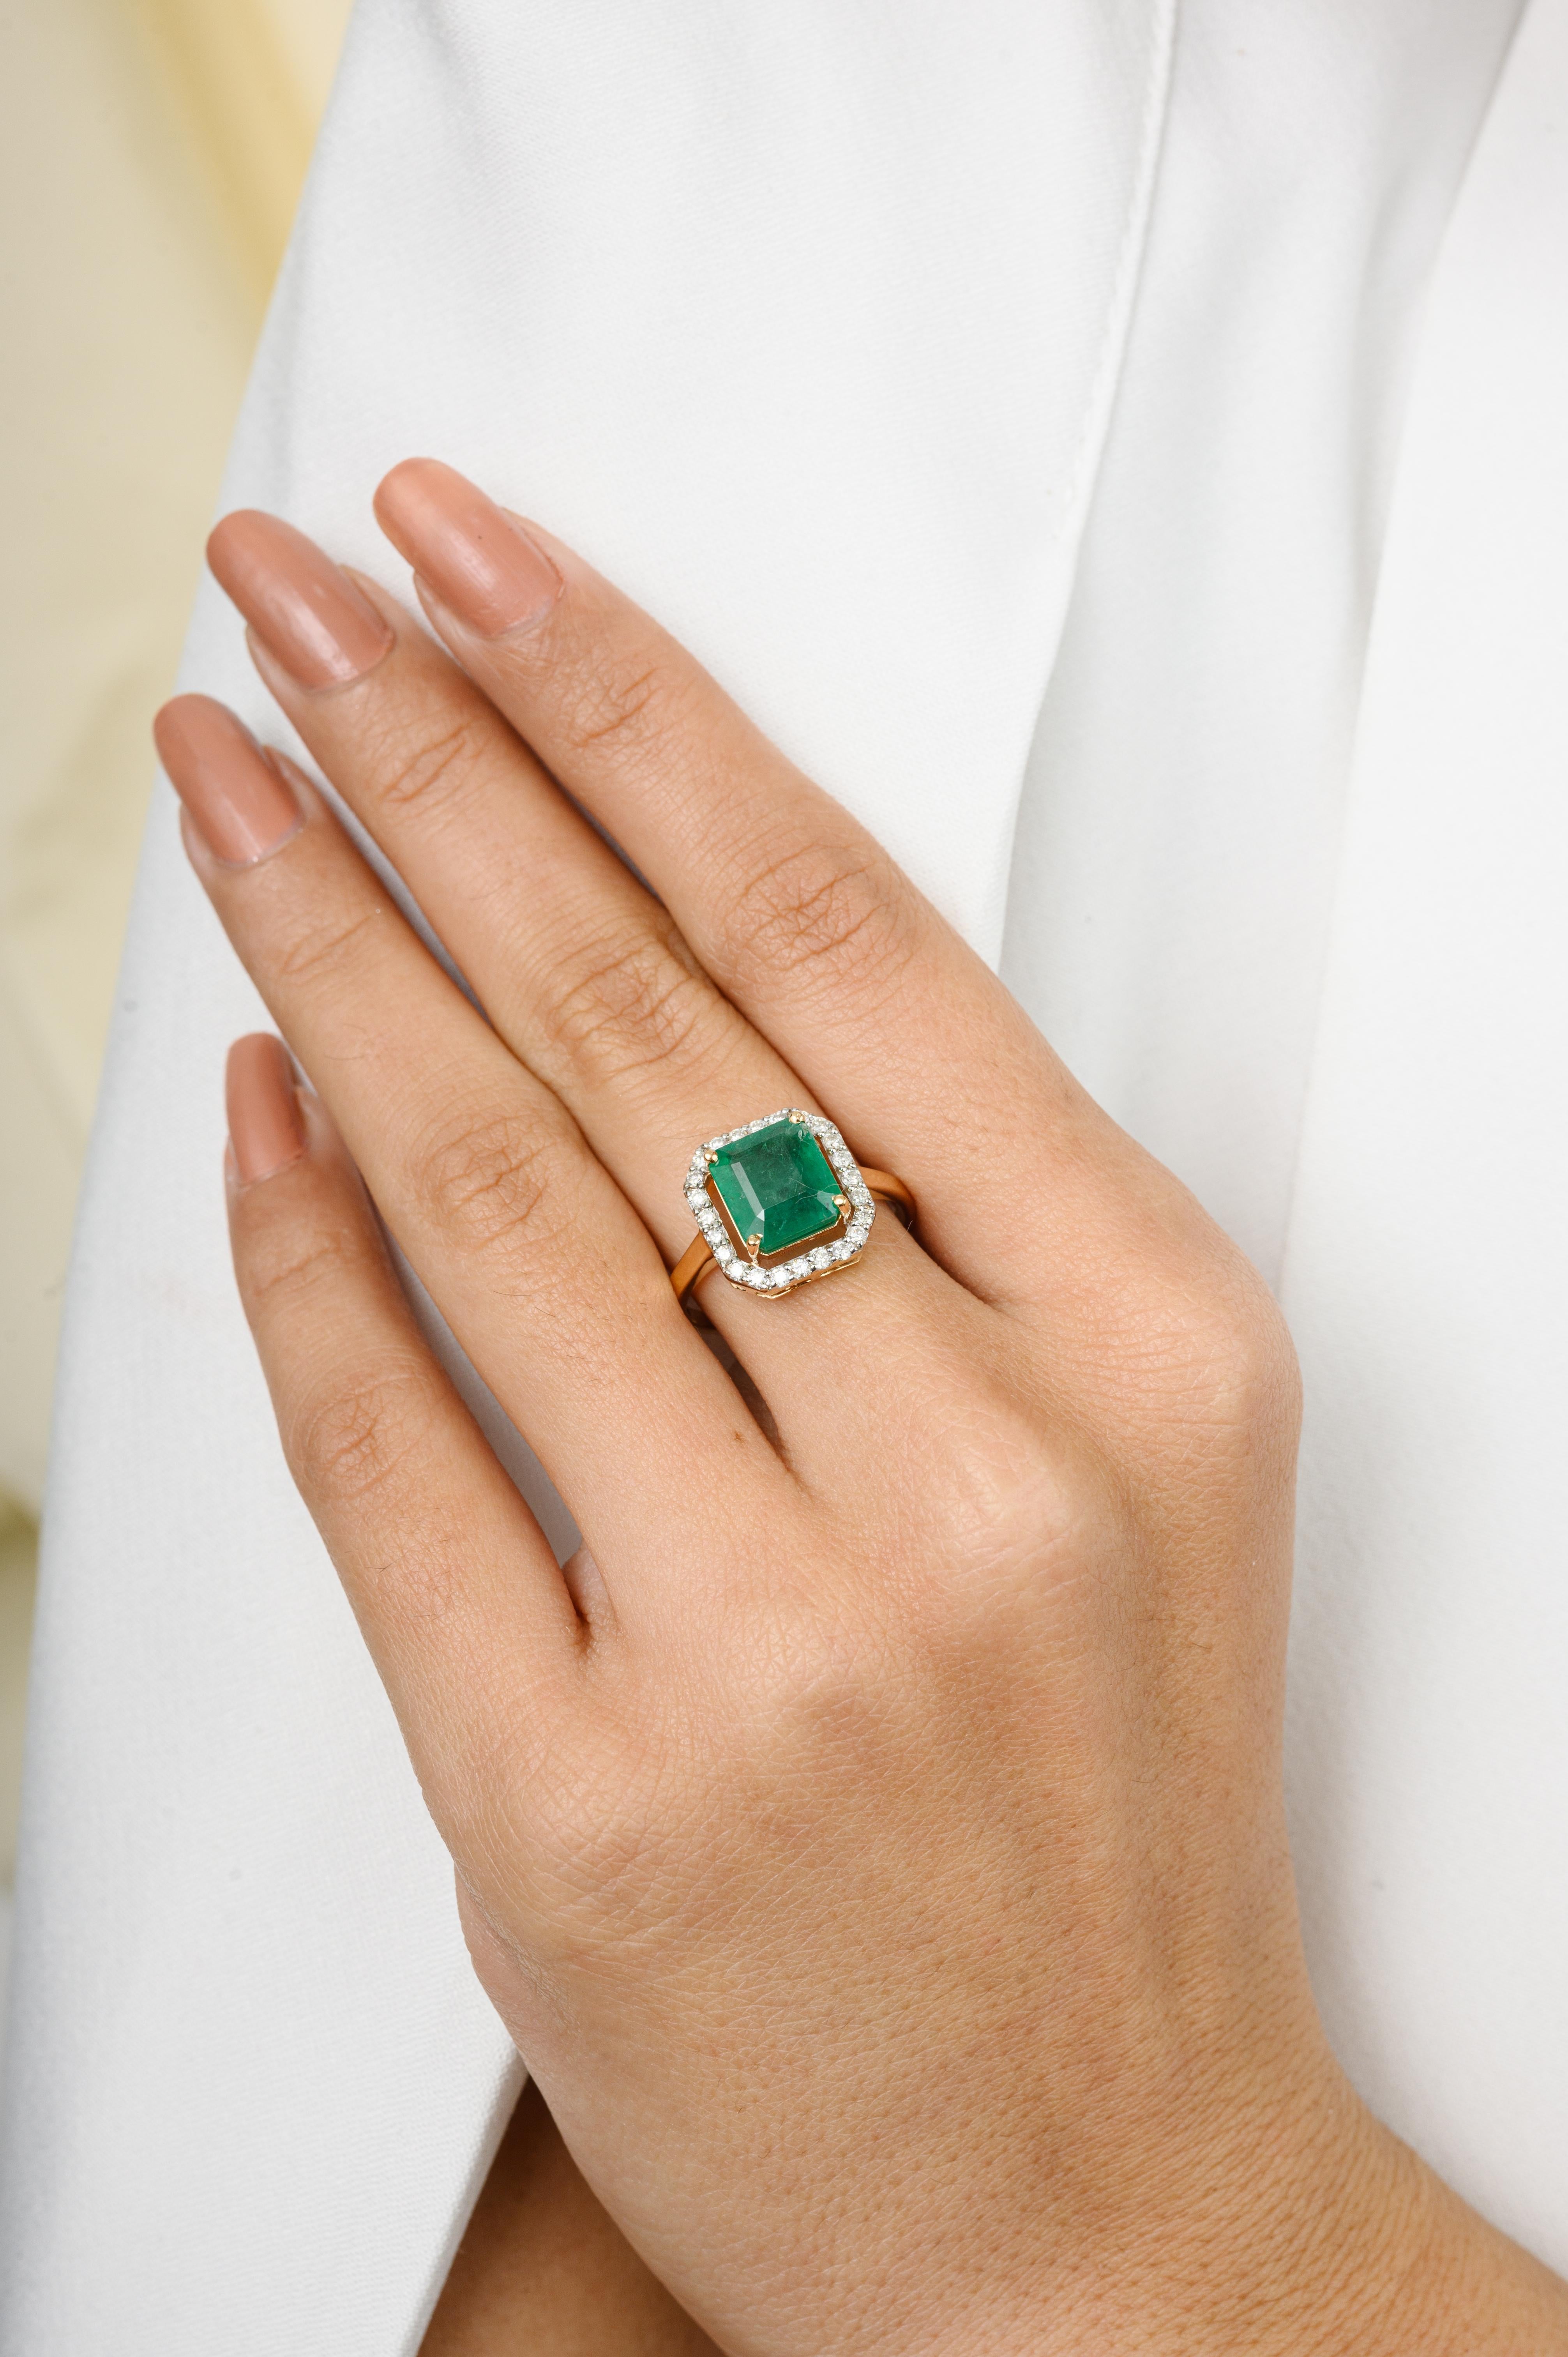 For Sale:  1.5 Carat Square Cut Emerald Diamond Halo Ring for Women in 18k Yellow Gold 4